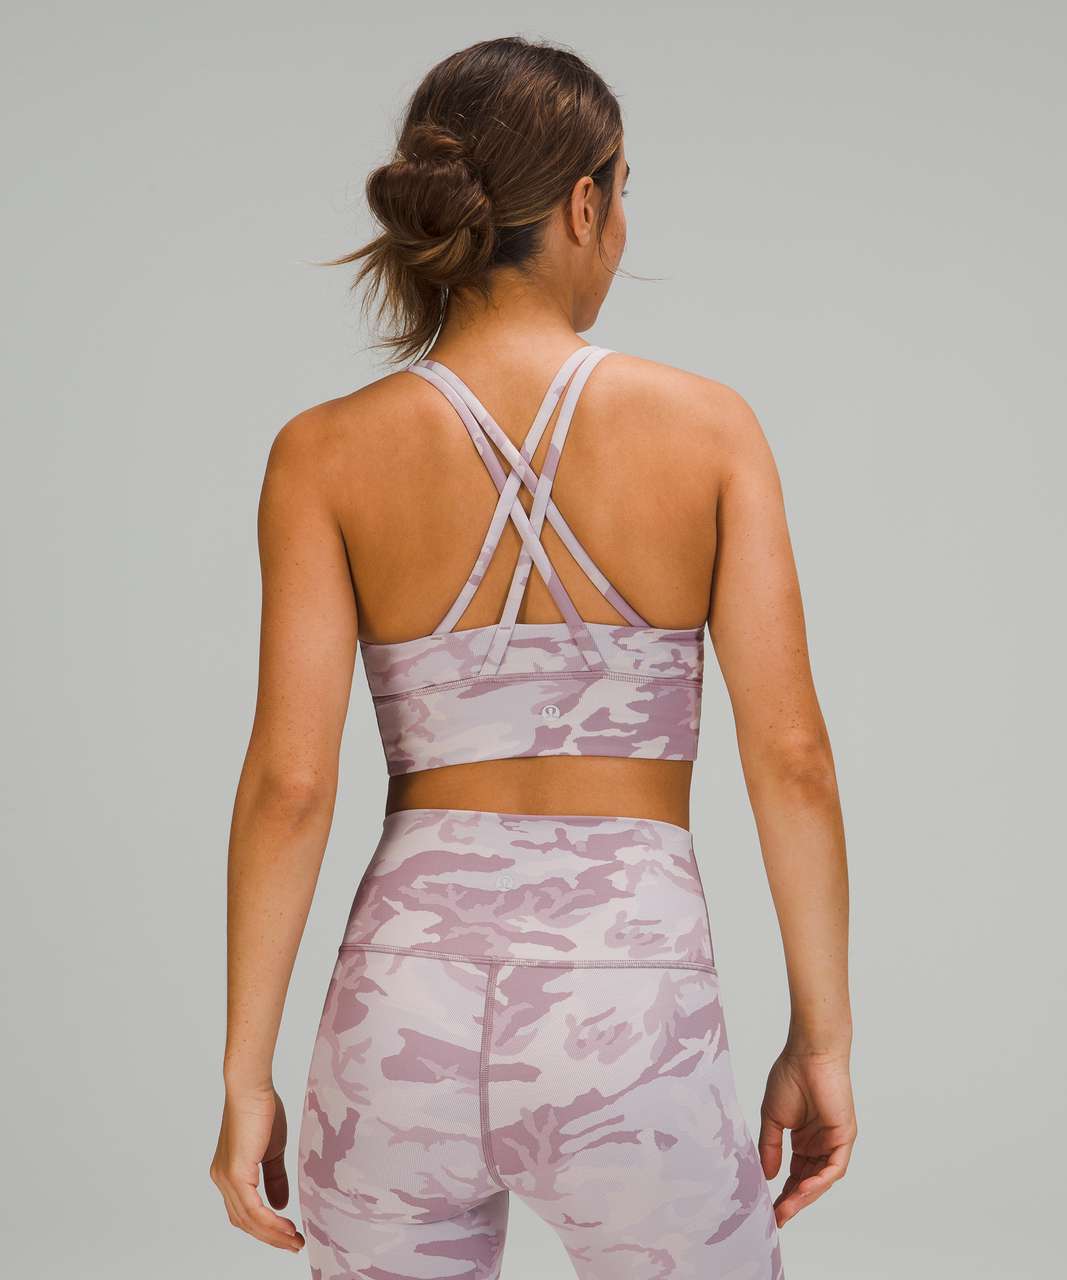 Lululemon Free to be Wild Sports Bra in Incognito Camo Jacquard Alpine  White Starlight Size XS - $34 (29% Off Retail) - From mira